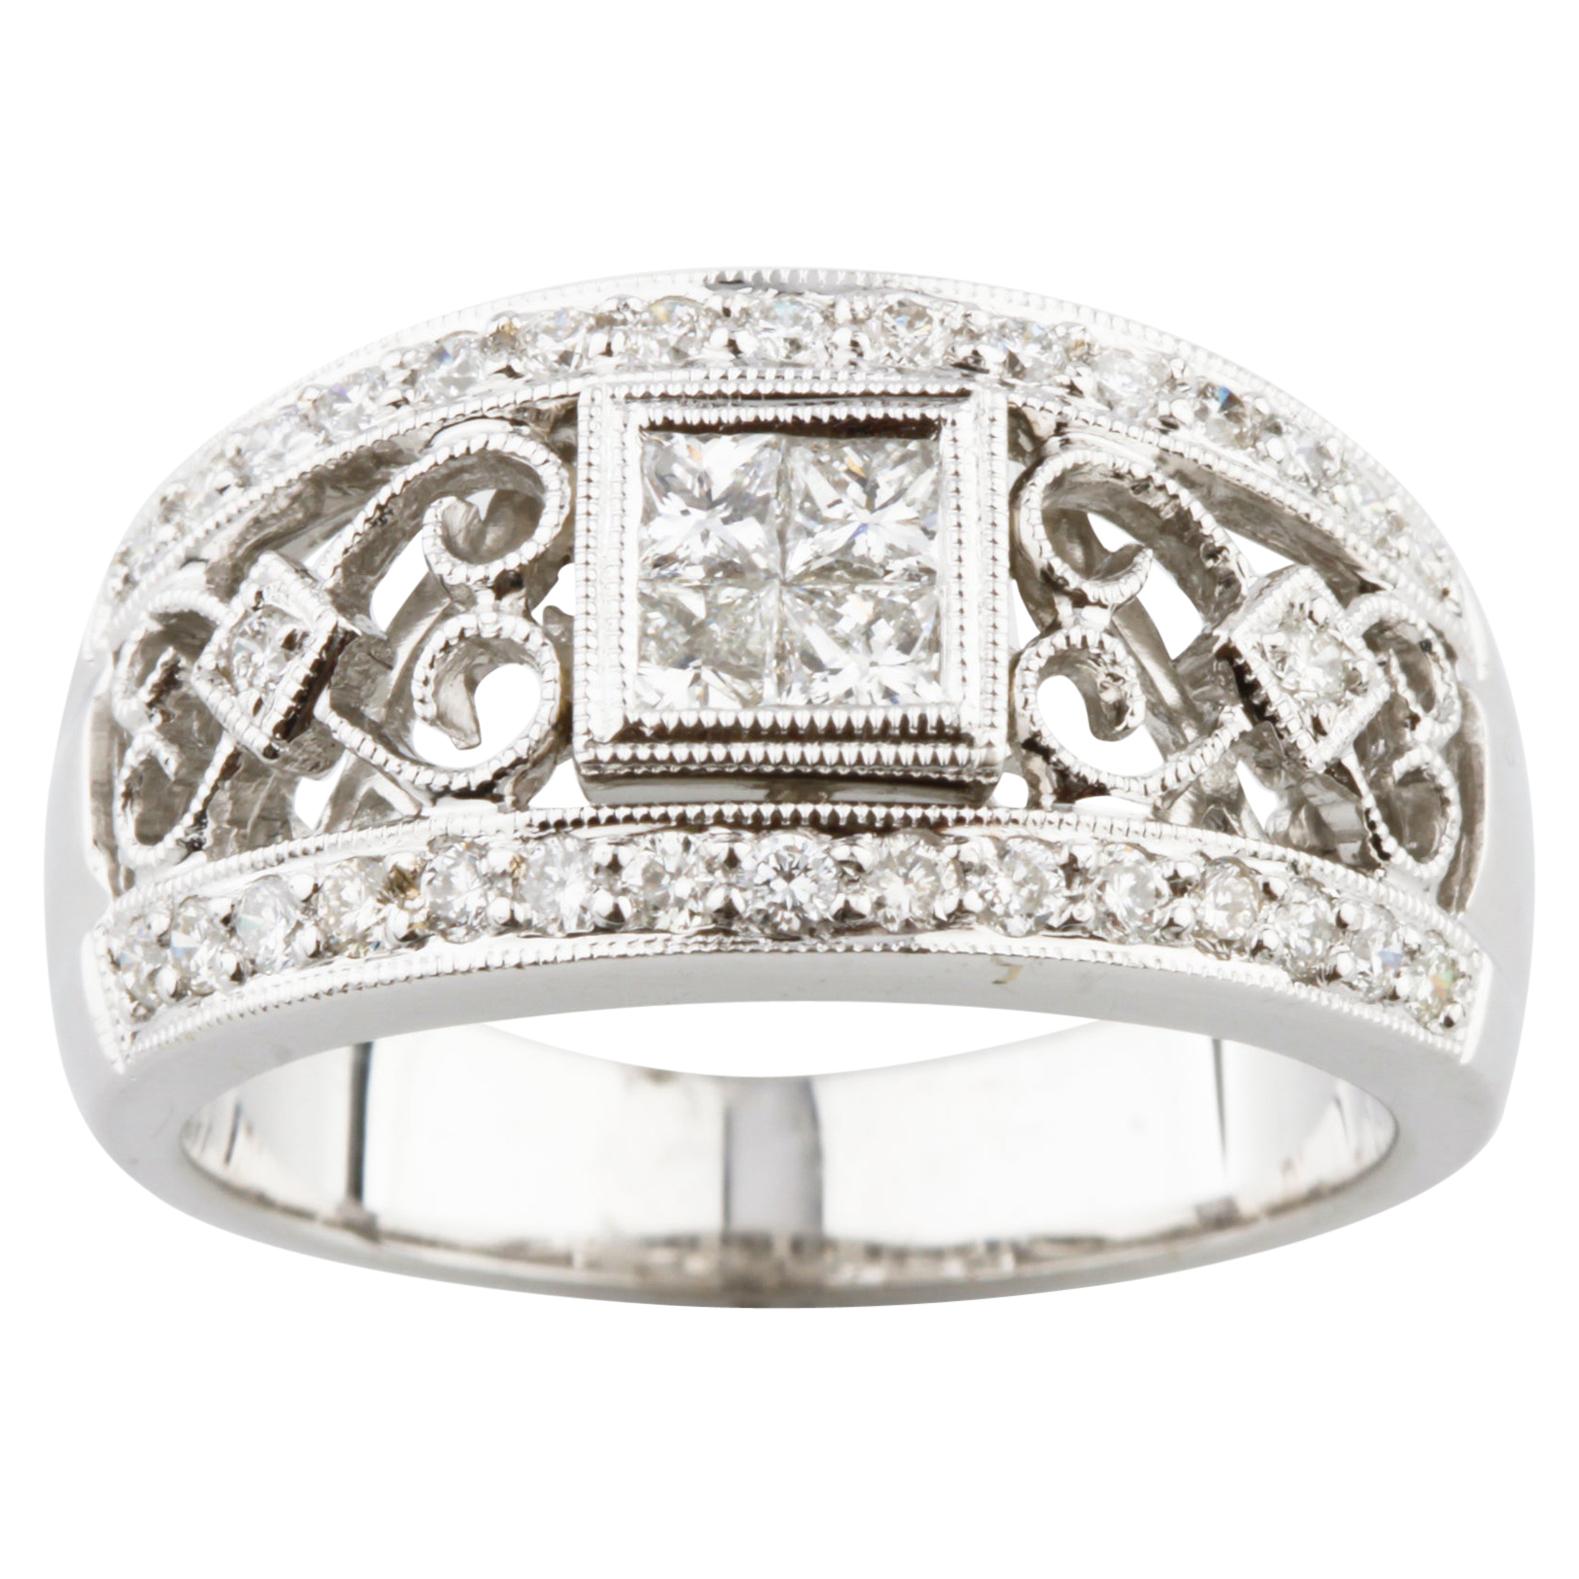 1.25 Carat Diamond White Gold Band Ring with Milgrain For Sale